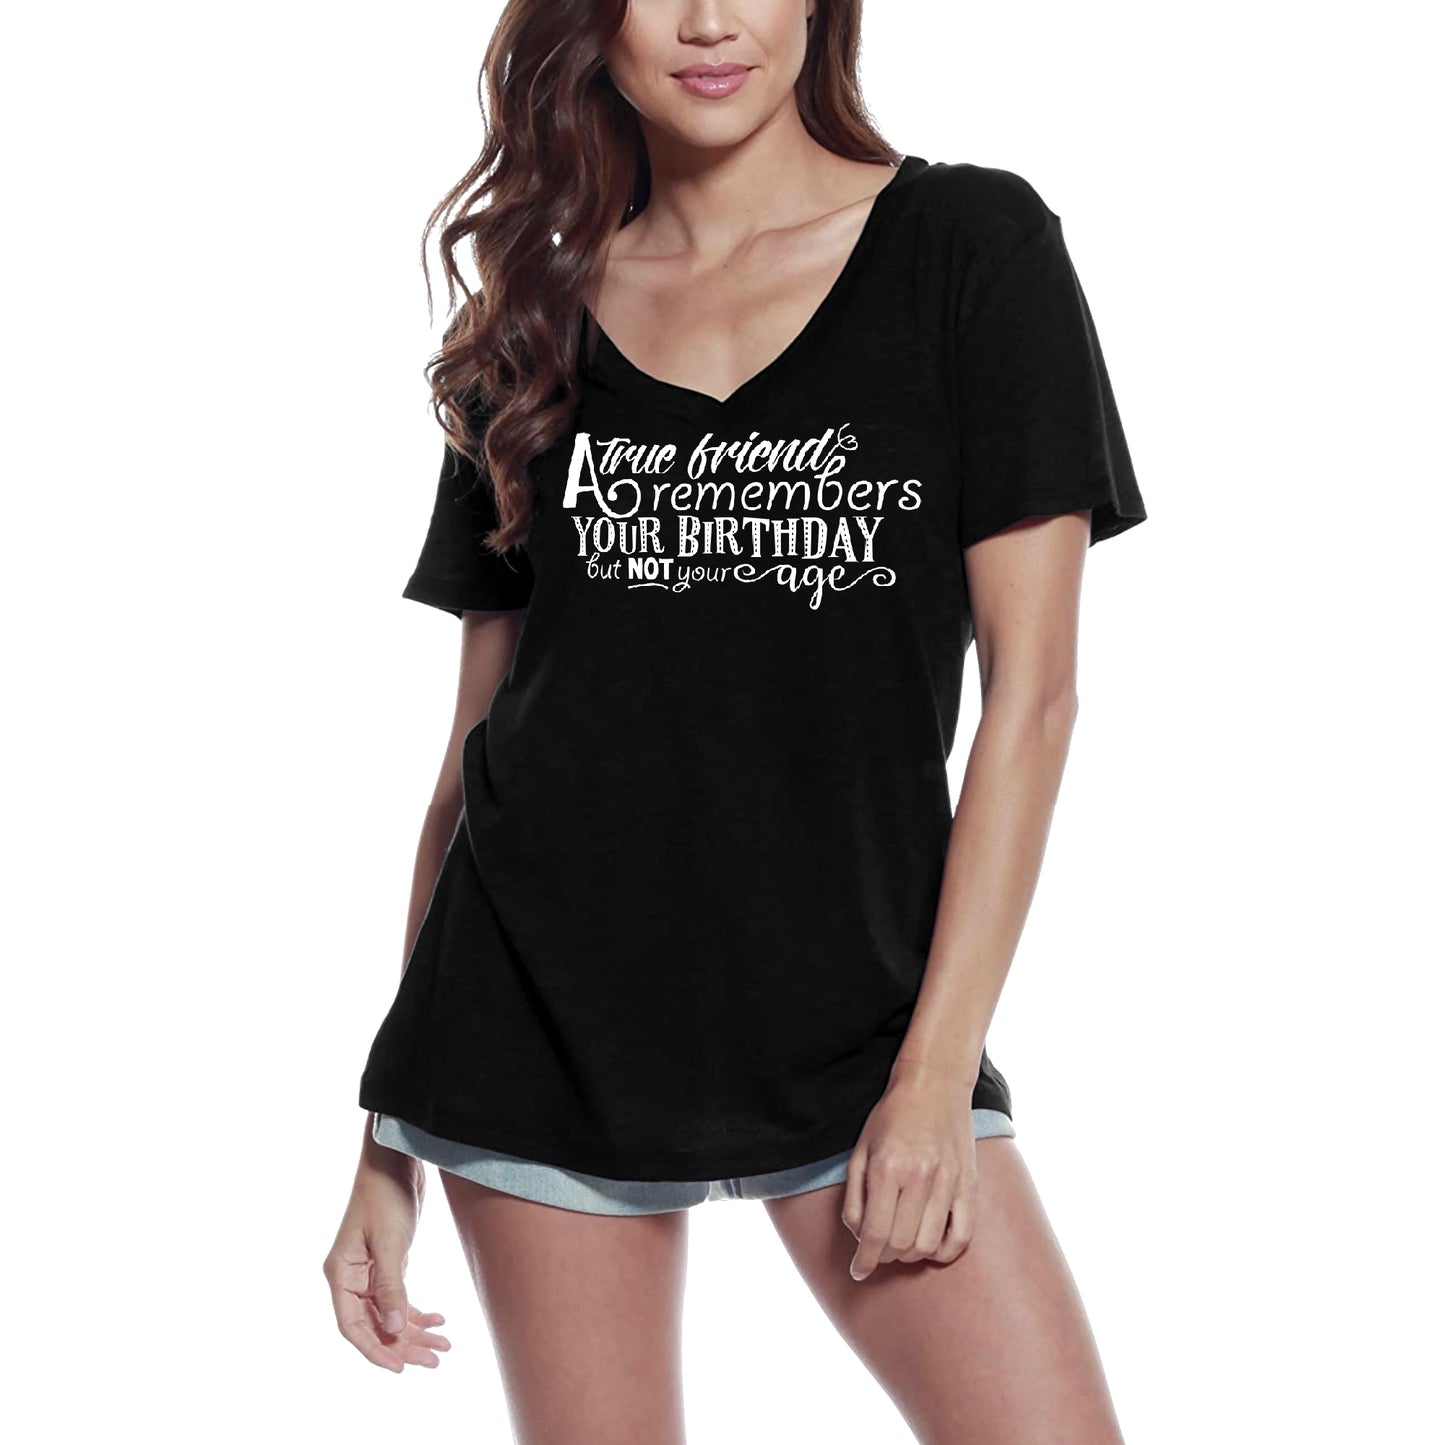 ULTRABASIC Damen-T-Shirt „True Friend Remembers Your Birthday but Not Your Age“ – lustige Humor-T-Shirt-Oberteile